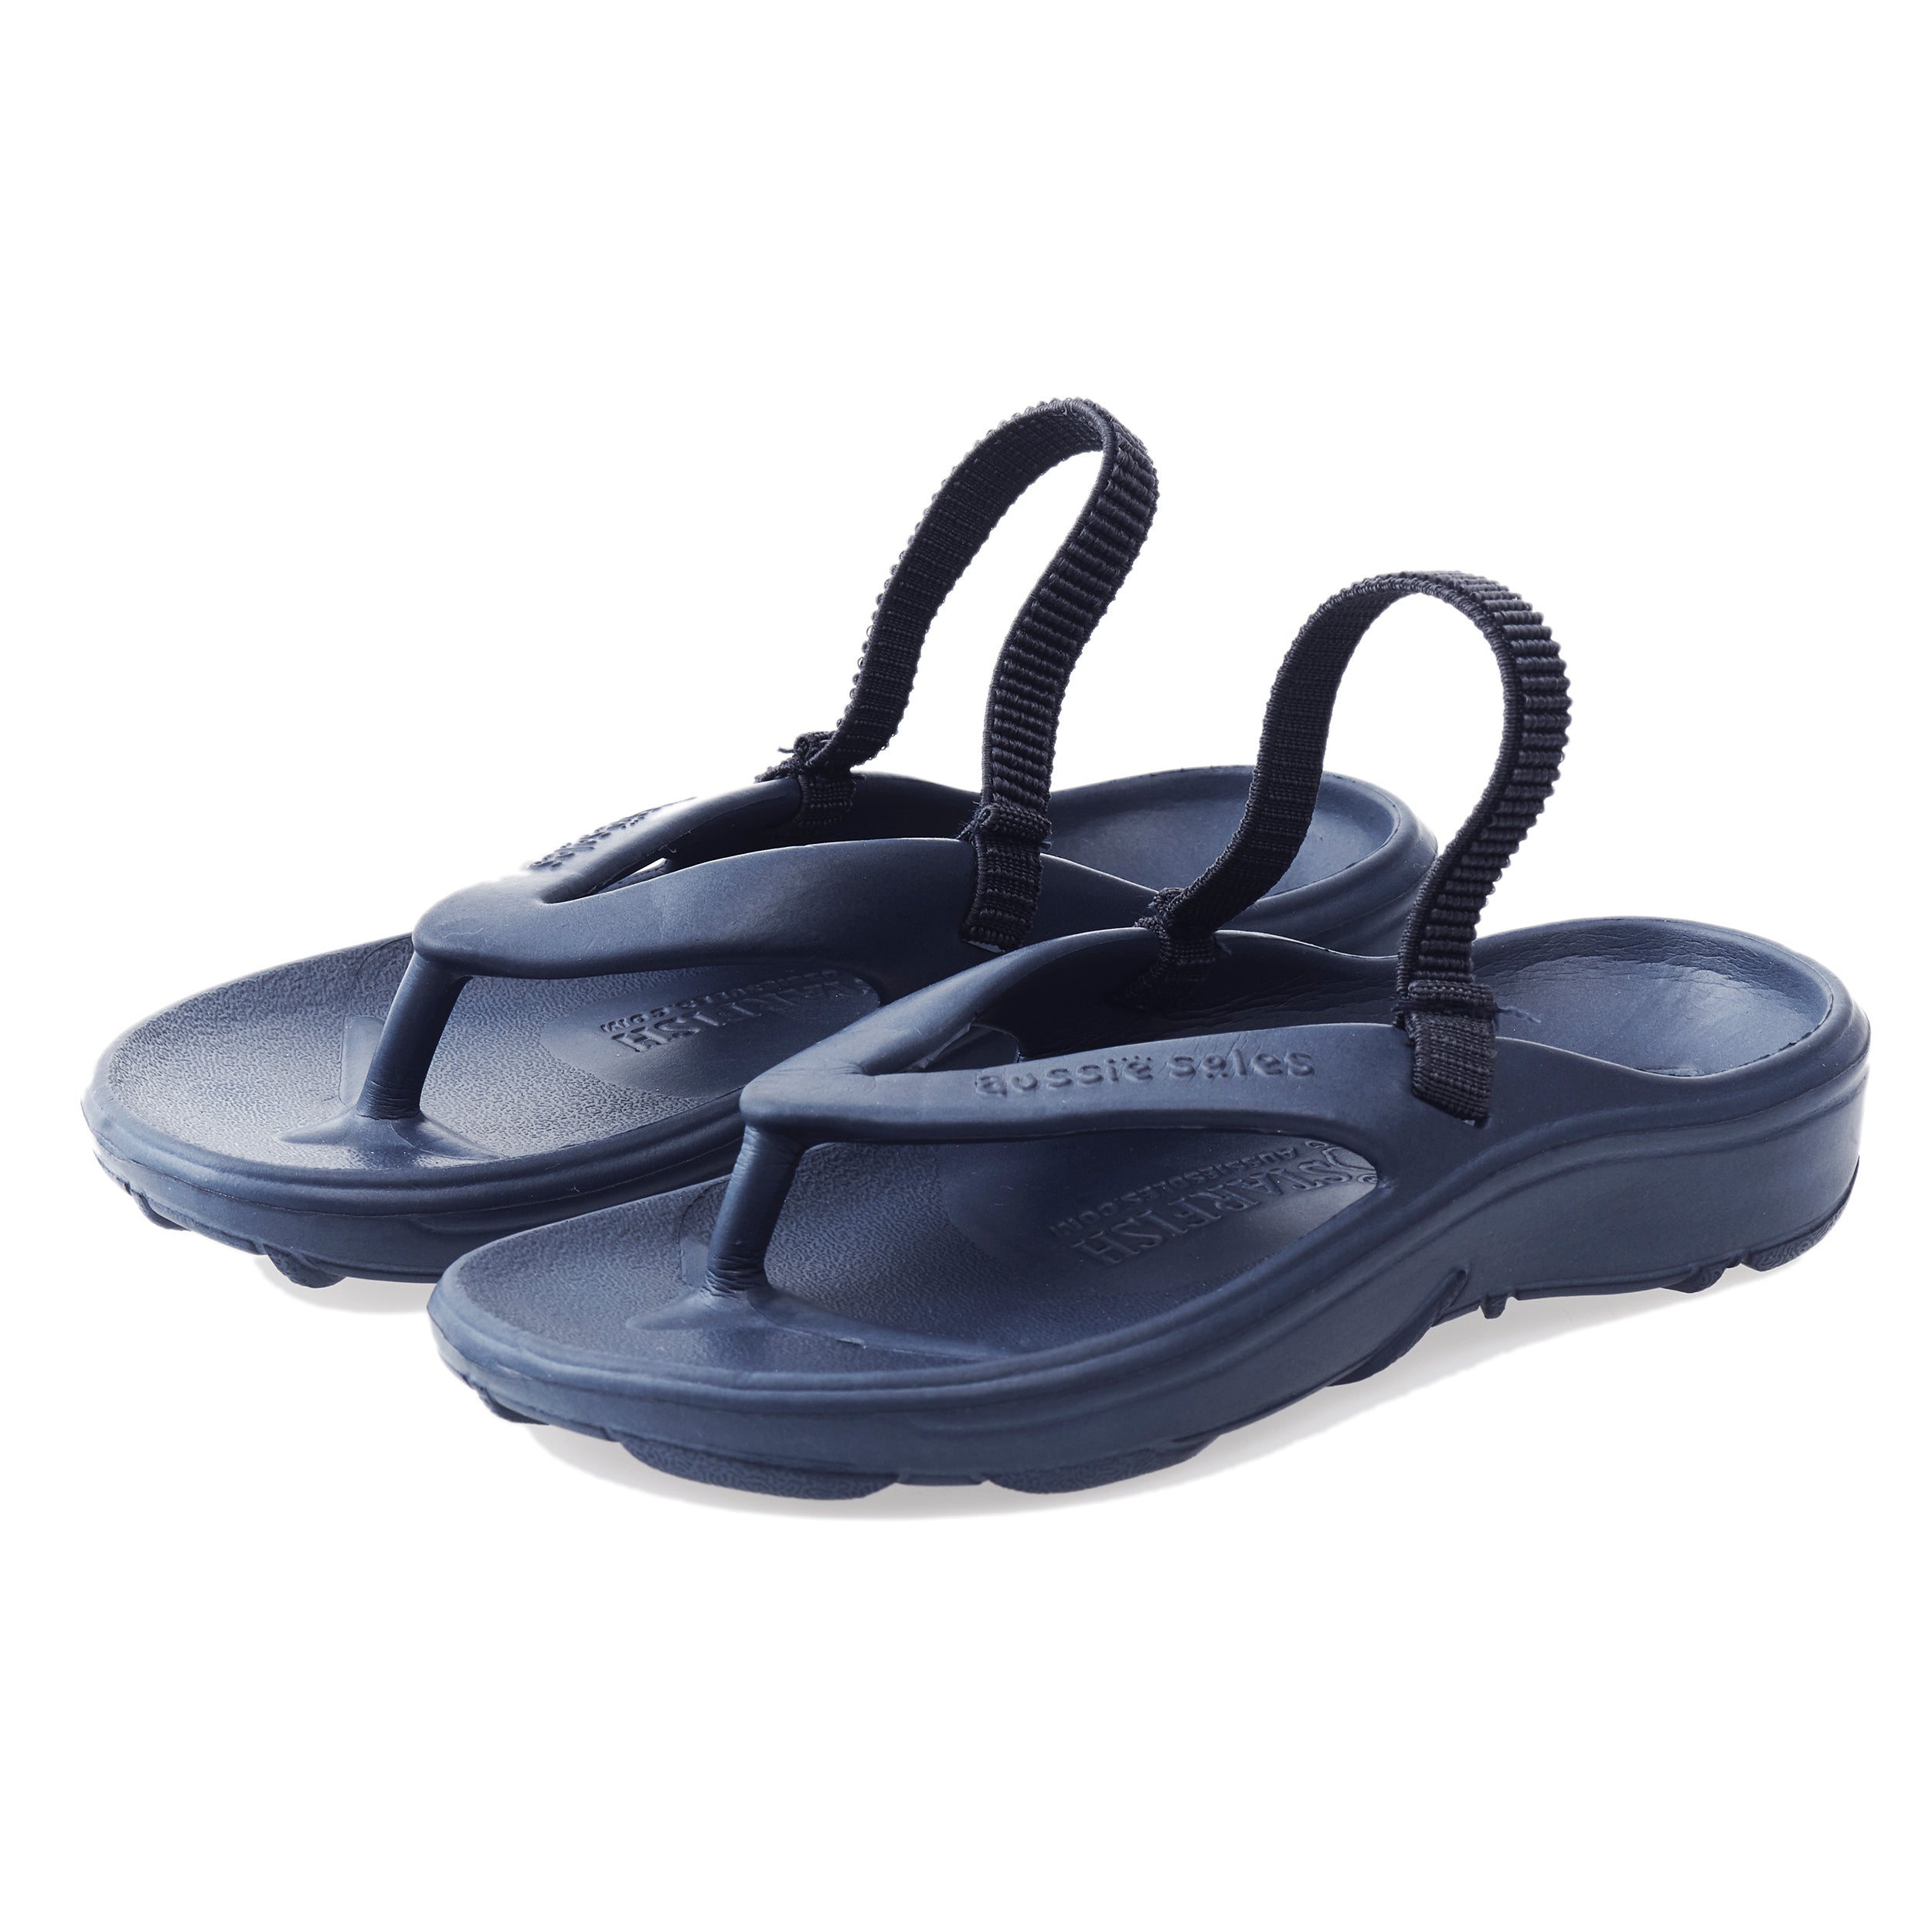 arch support sandals for kids